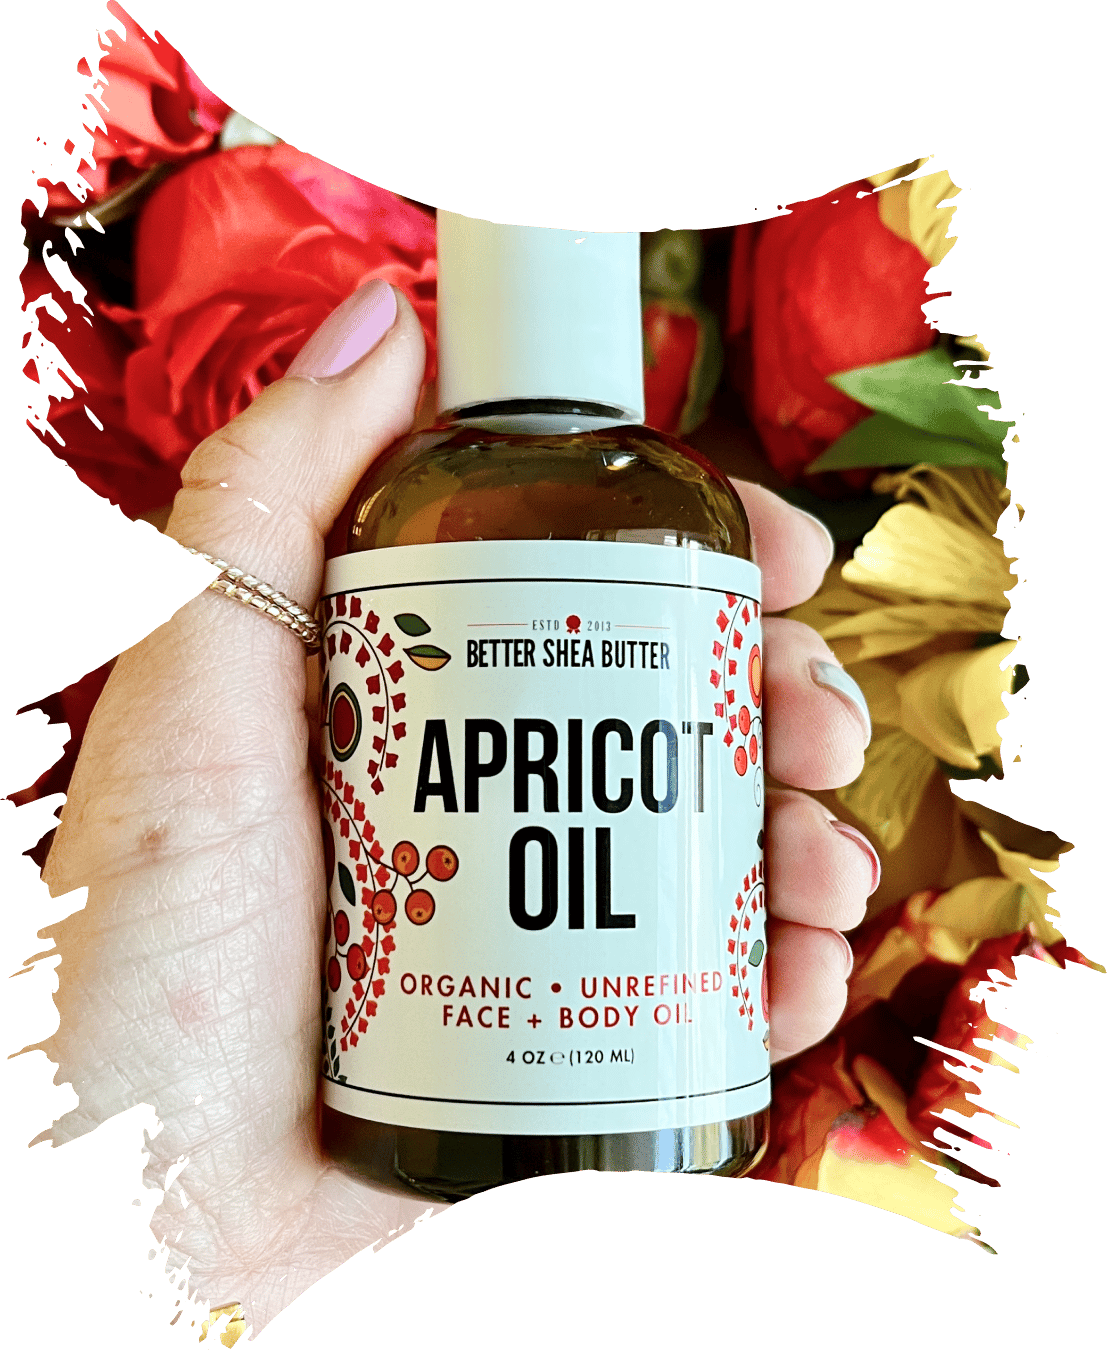 Apricot Kernel Carrier Oil – Butterfly Express Quality Essential Oils